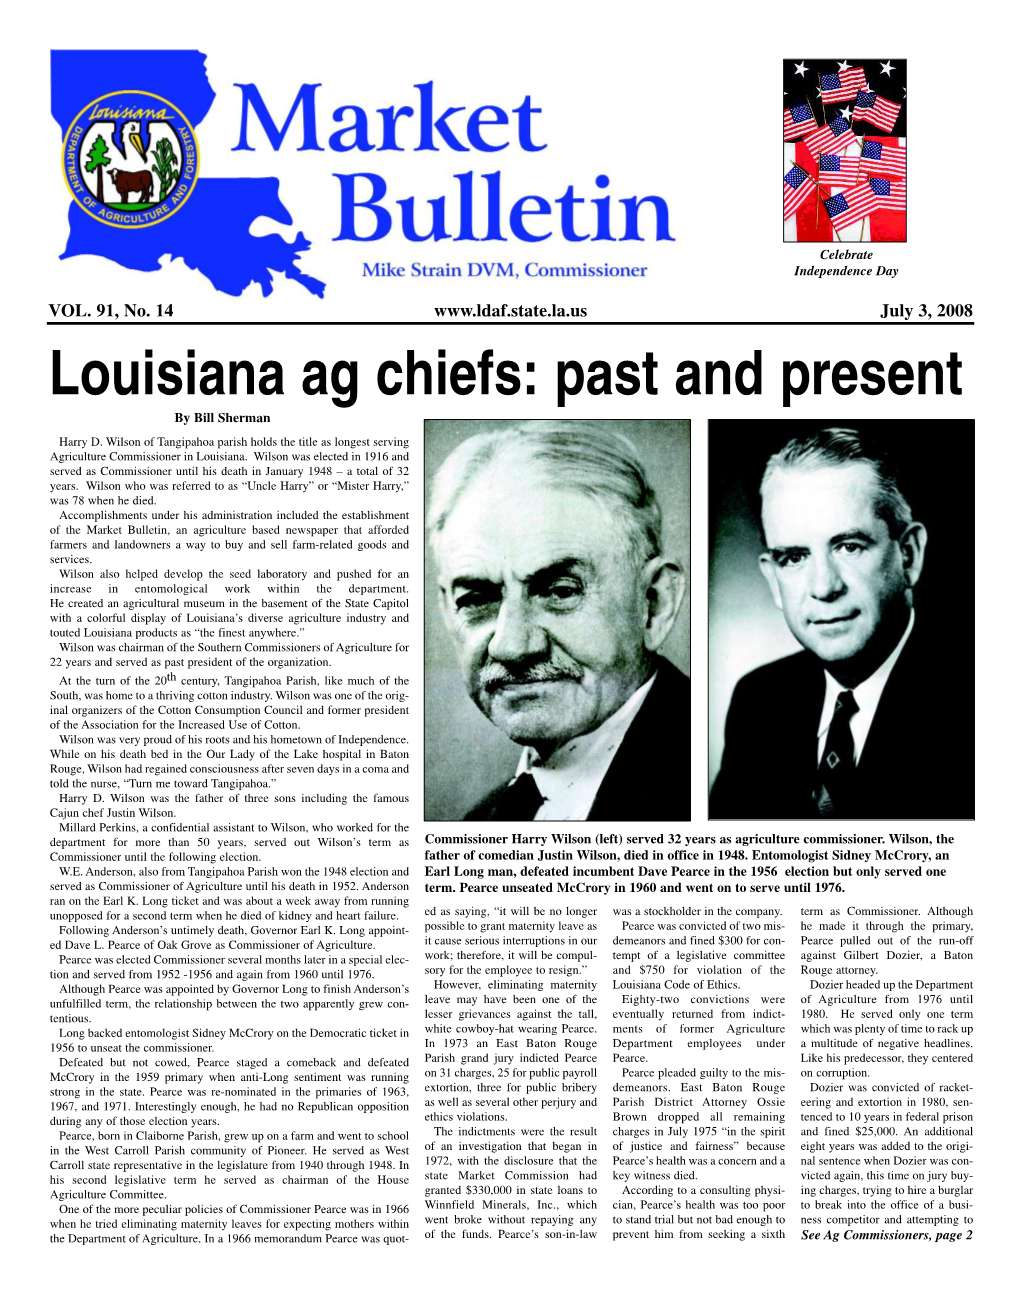 Louisiana Ag Chiefs: Past and Present by Bill Sherman Harry D